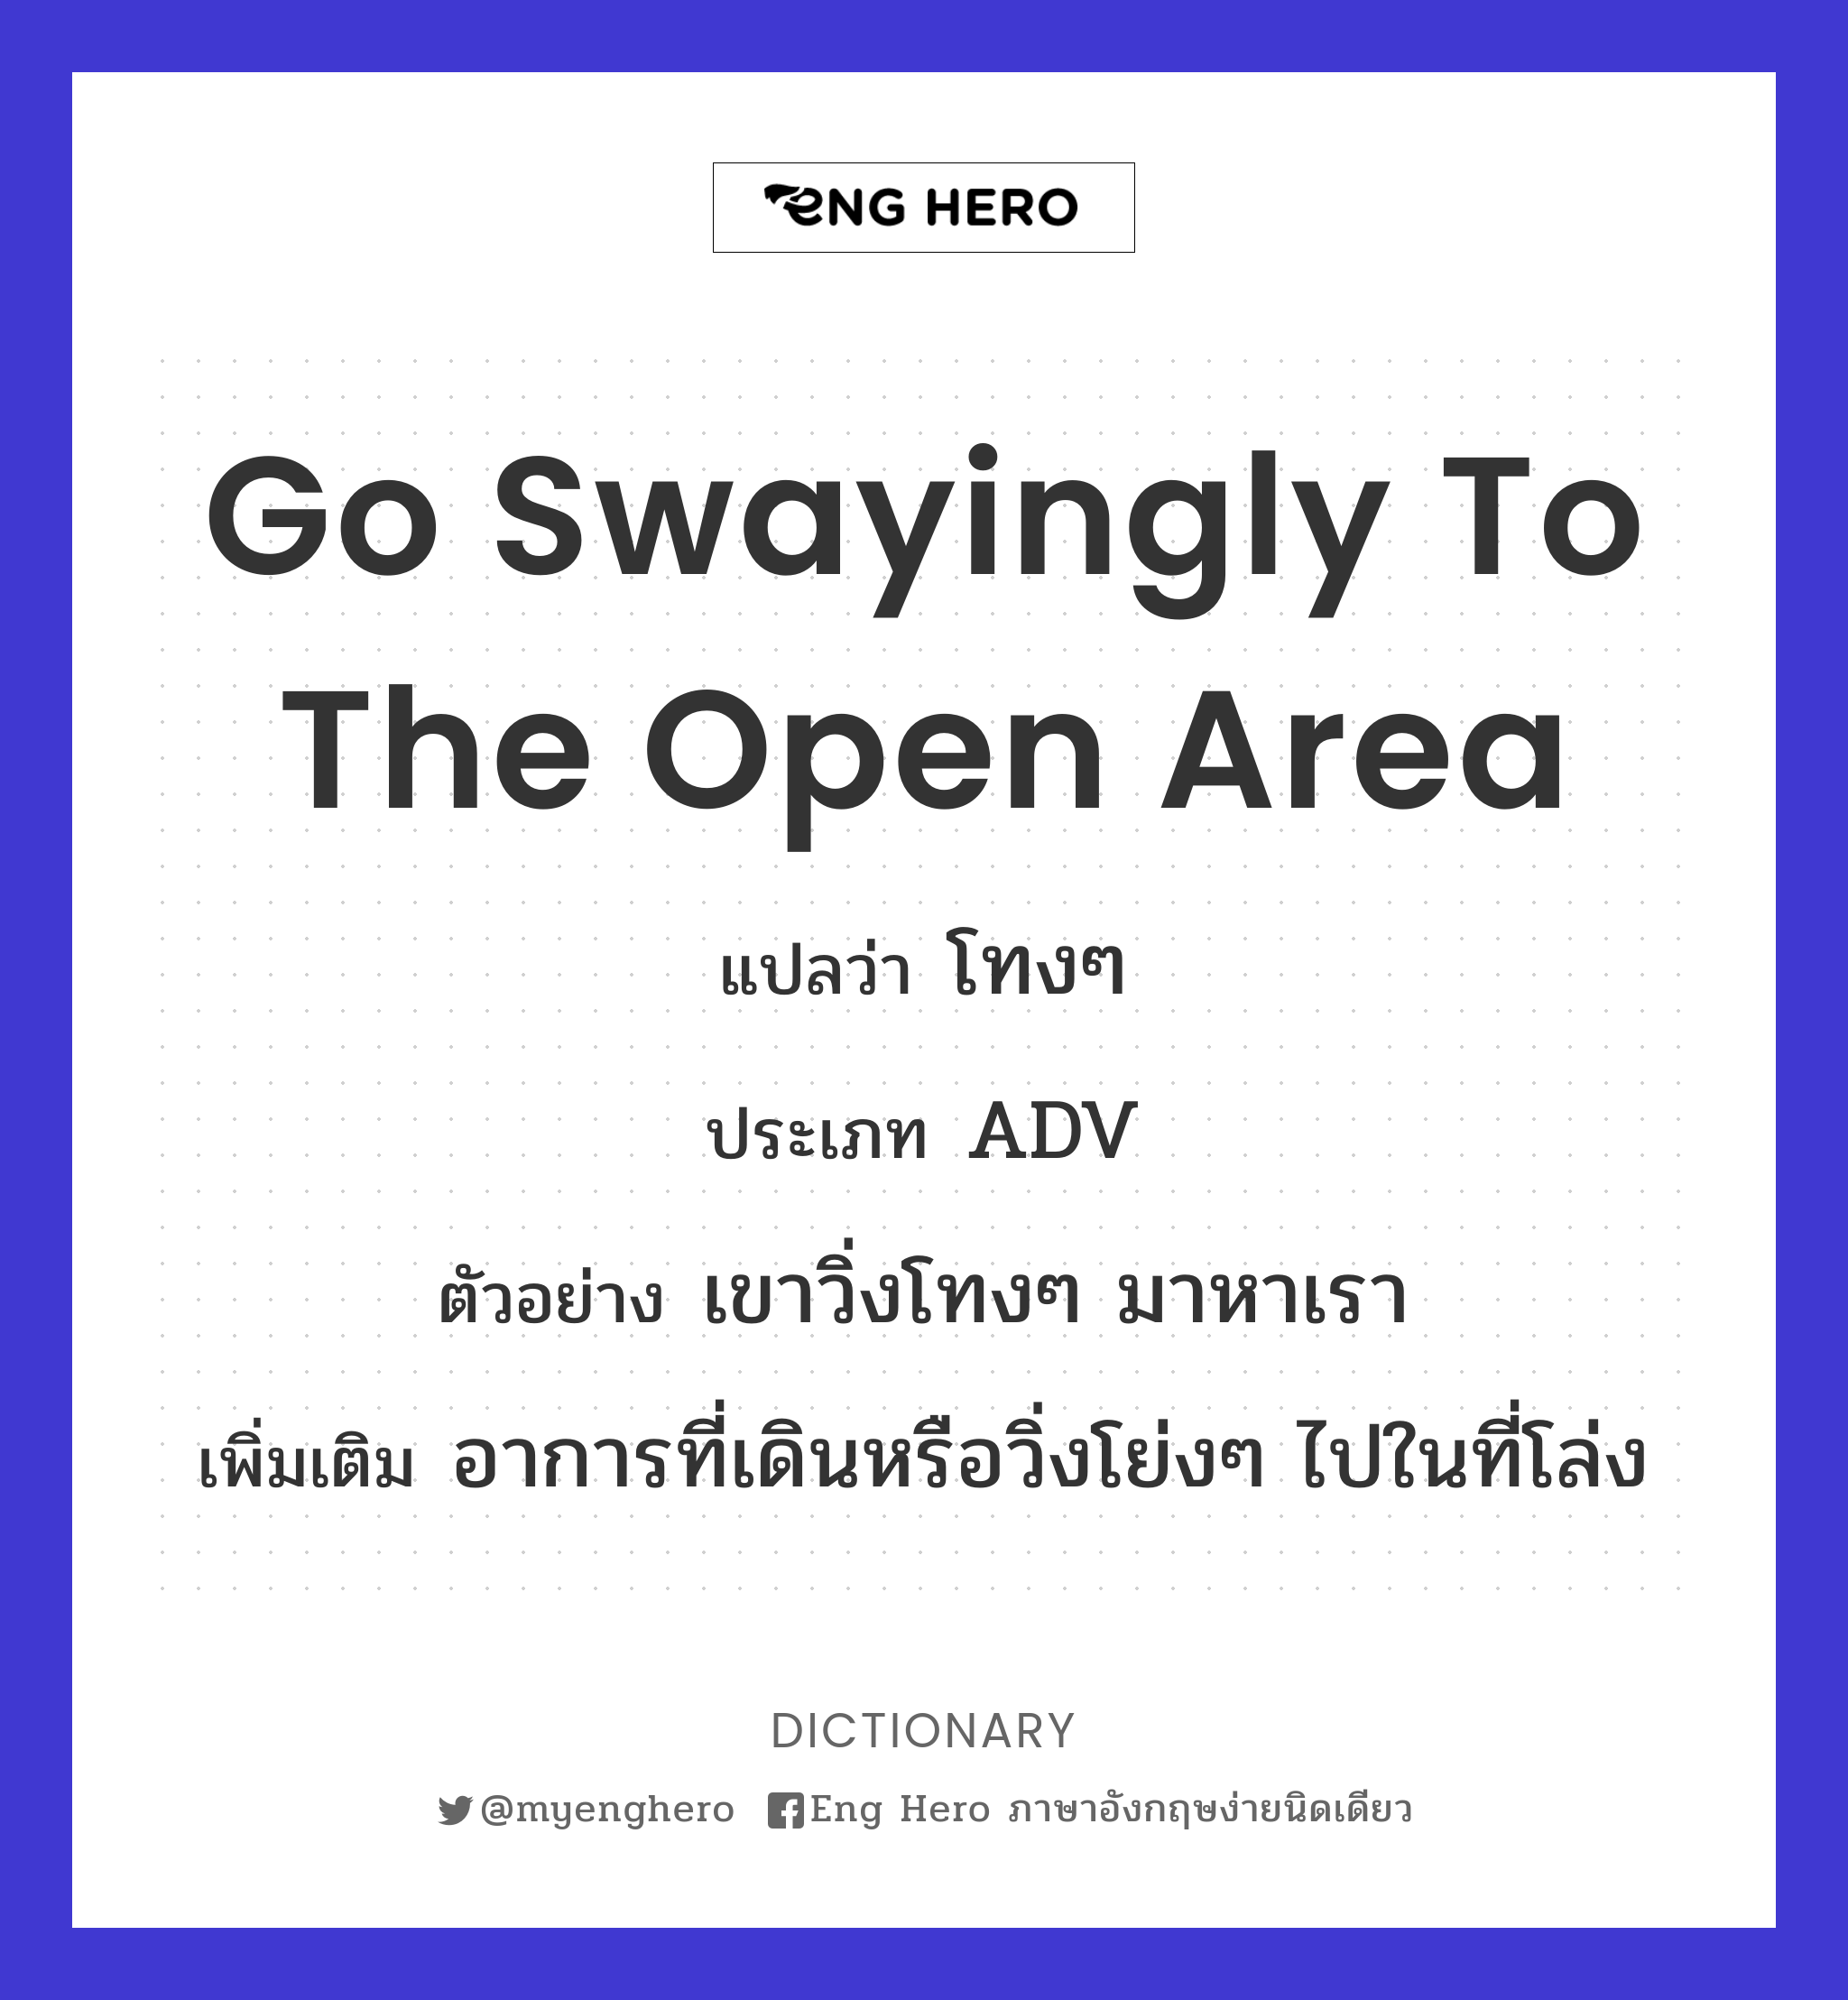 go swayingly to the open area